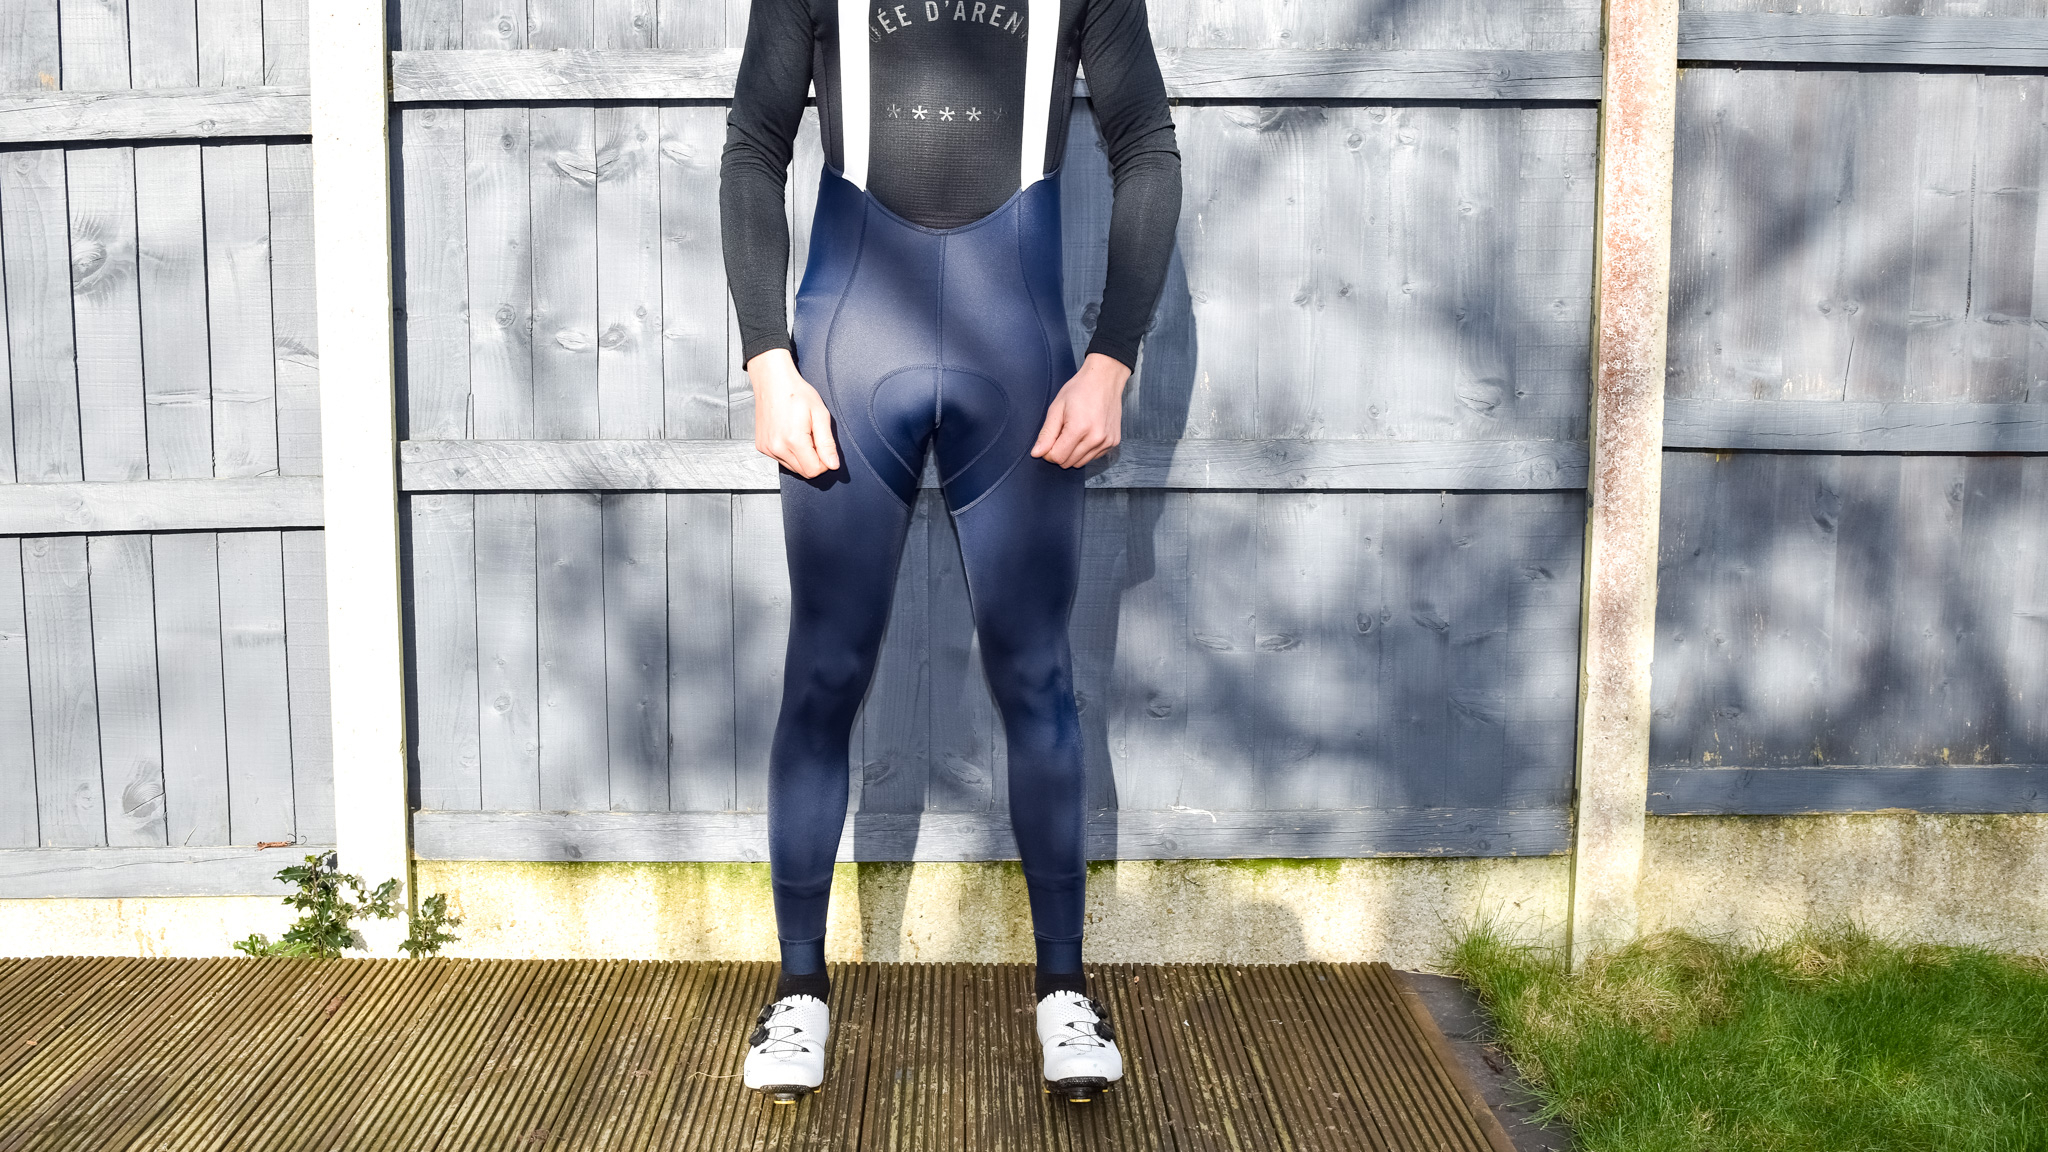 Rapha Pro Team Training bib tights review: Lightweight comfort and style